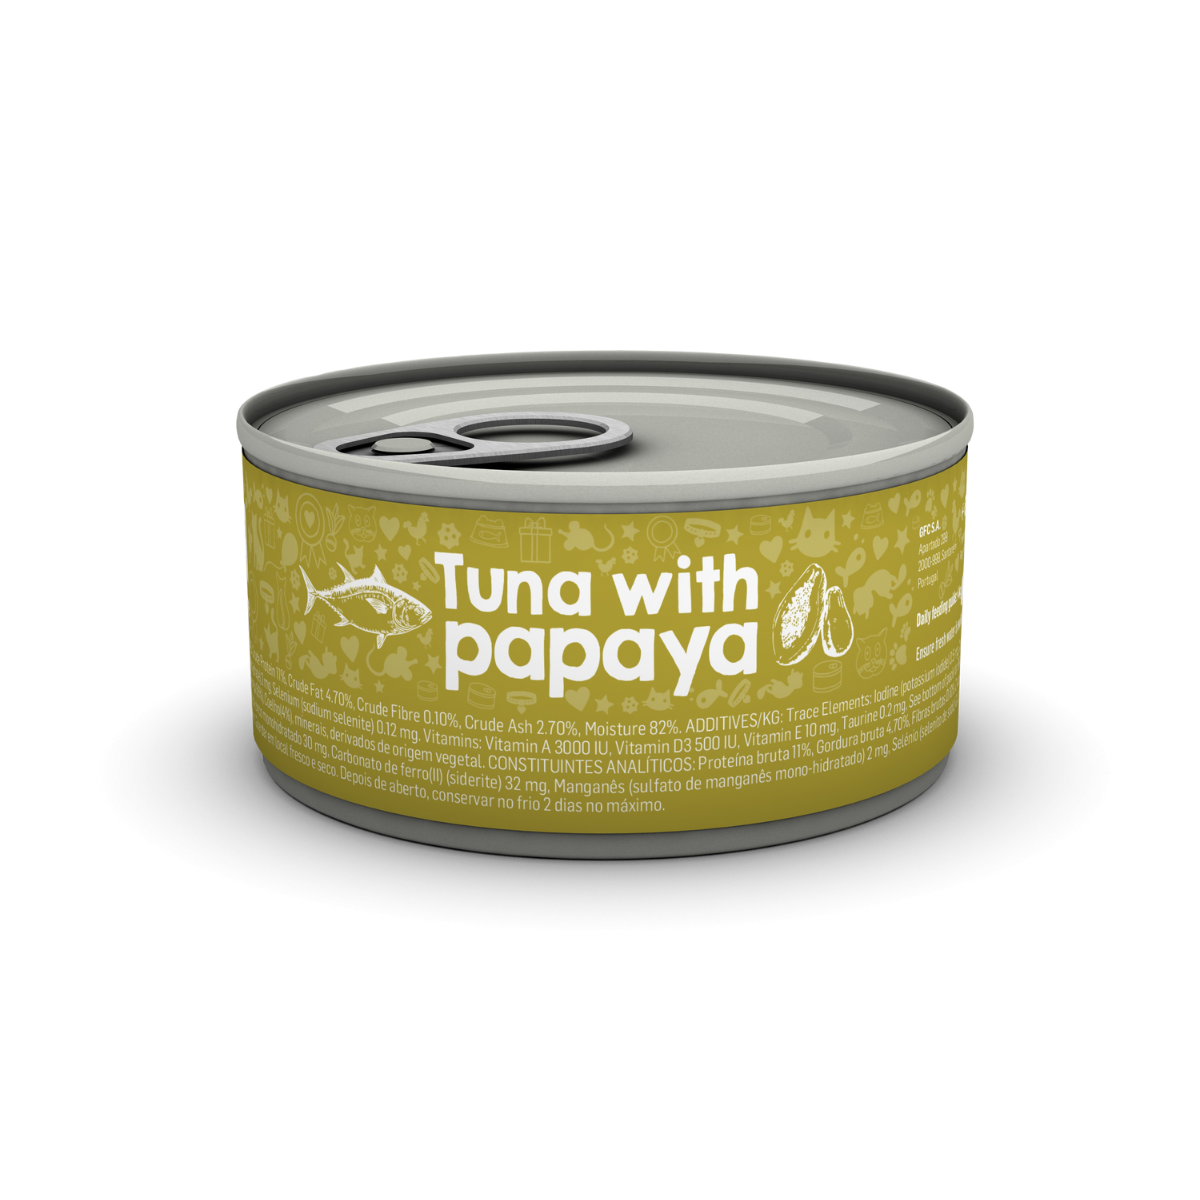 Tuna, cod with papaya - canned food for cats and kittens